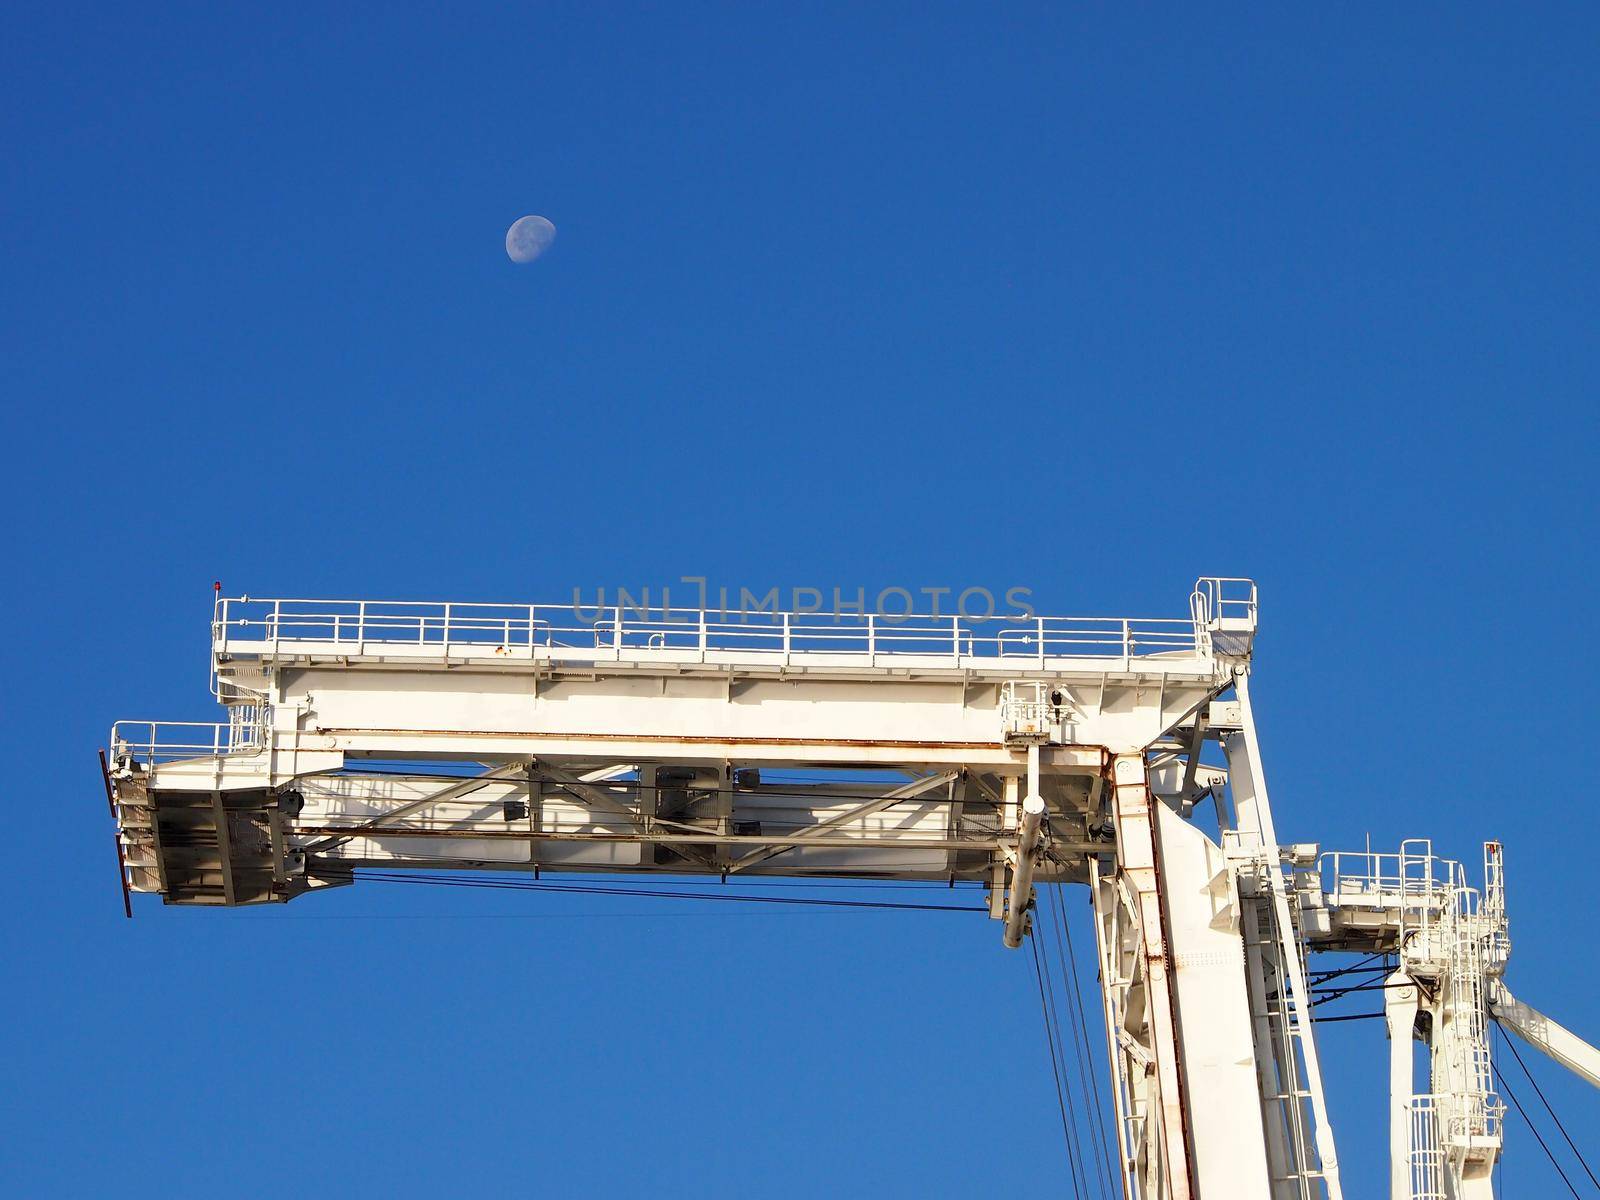 Lifting arm of Large crane with blue sky and half moon in Oakland Harbor, California.